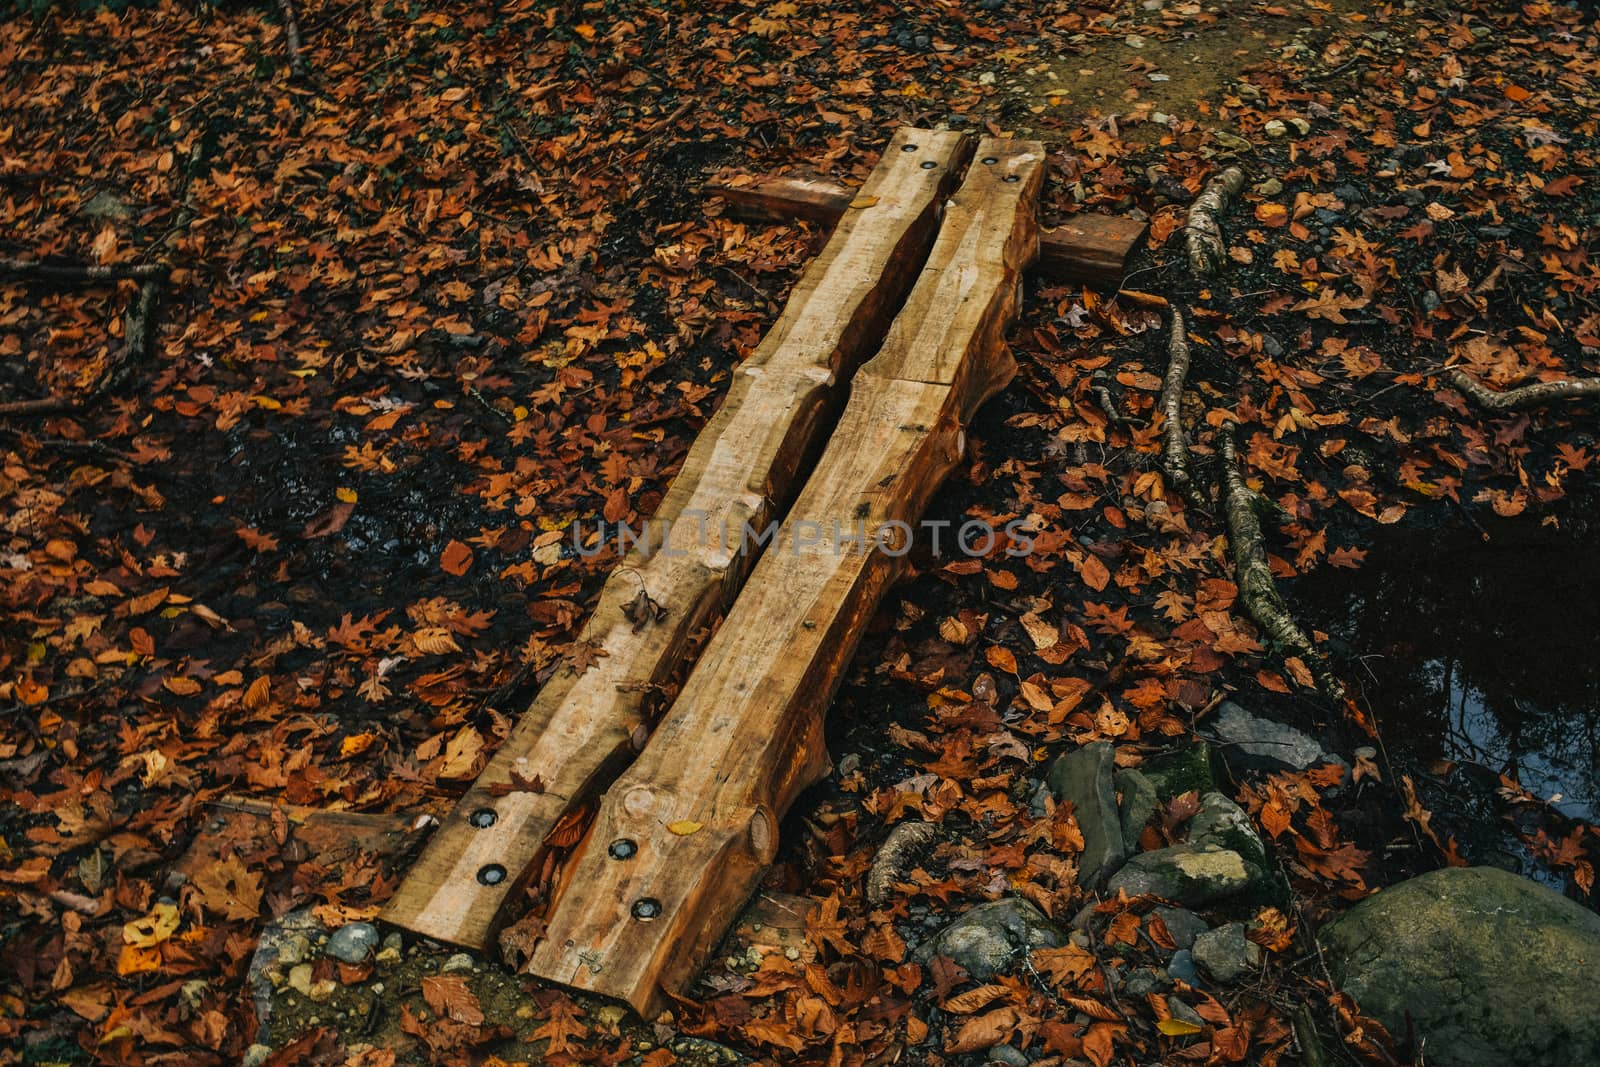 A Small Wooden Bridge Used to Cross a Creek by bju12290